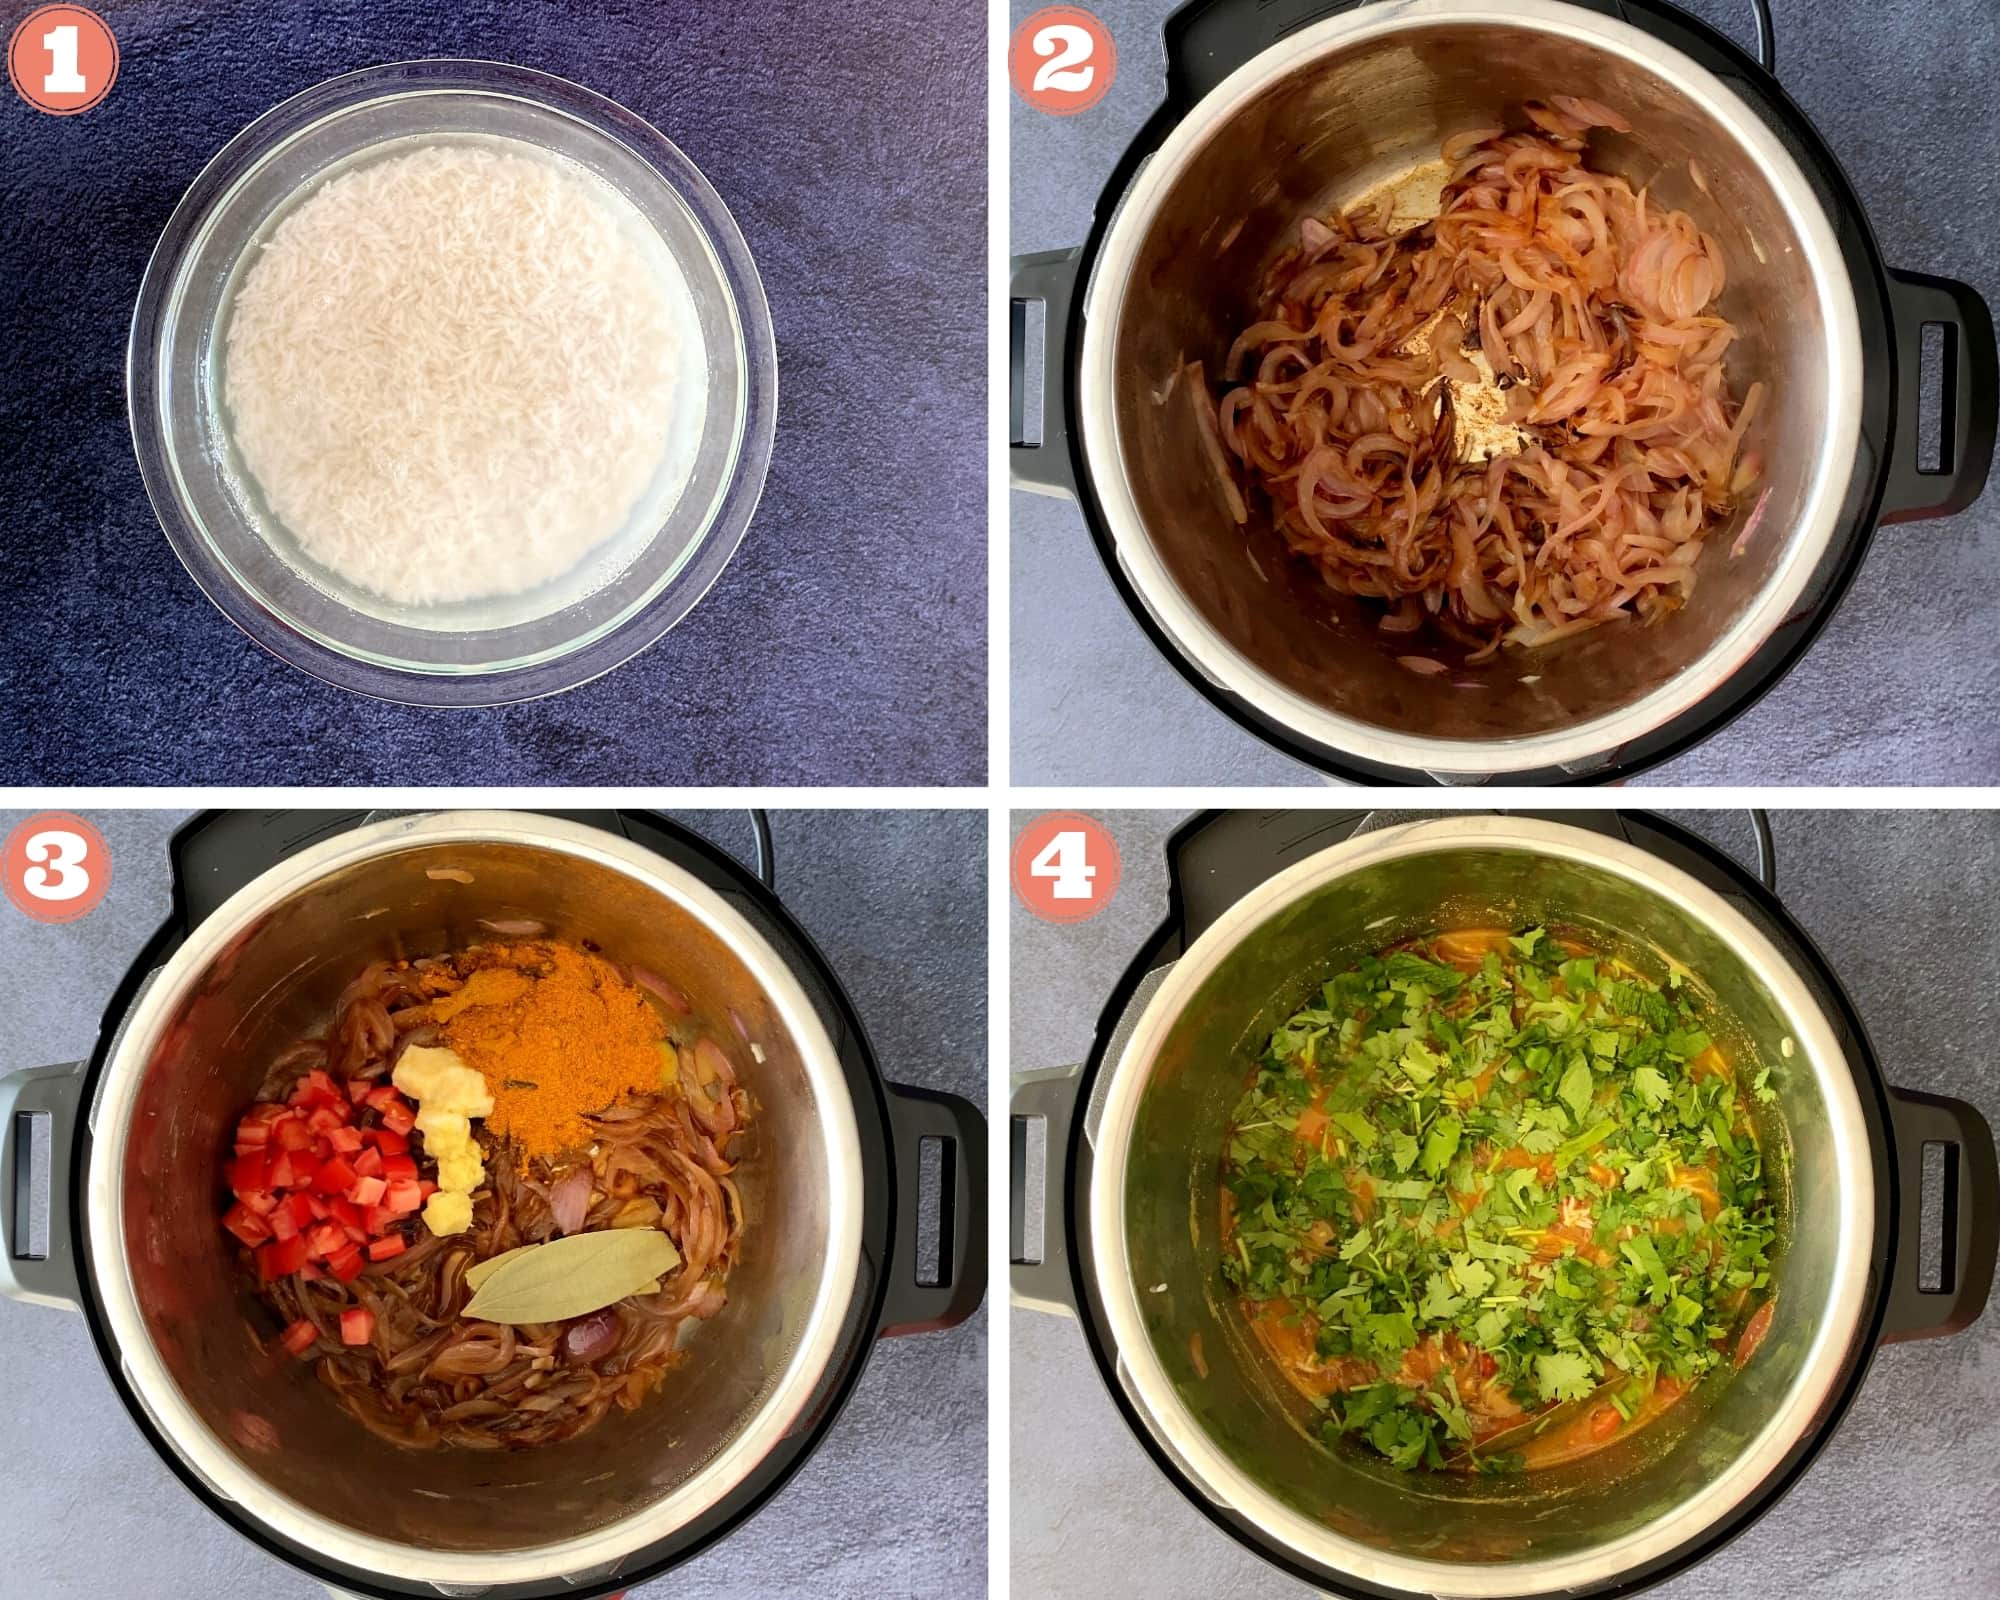 four steps showing soaked rice, frying onions and aromatics, then assembling biryani in the pot